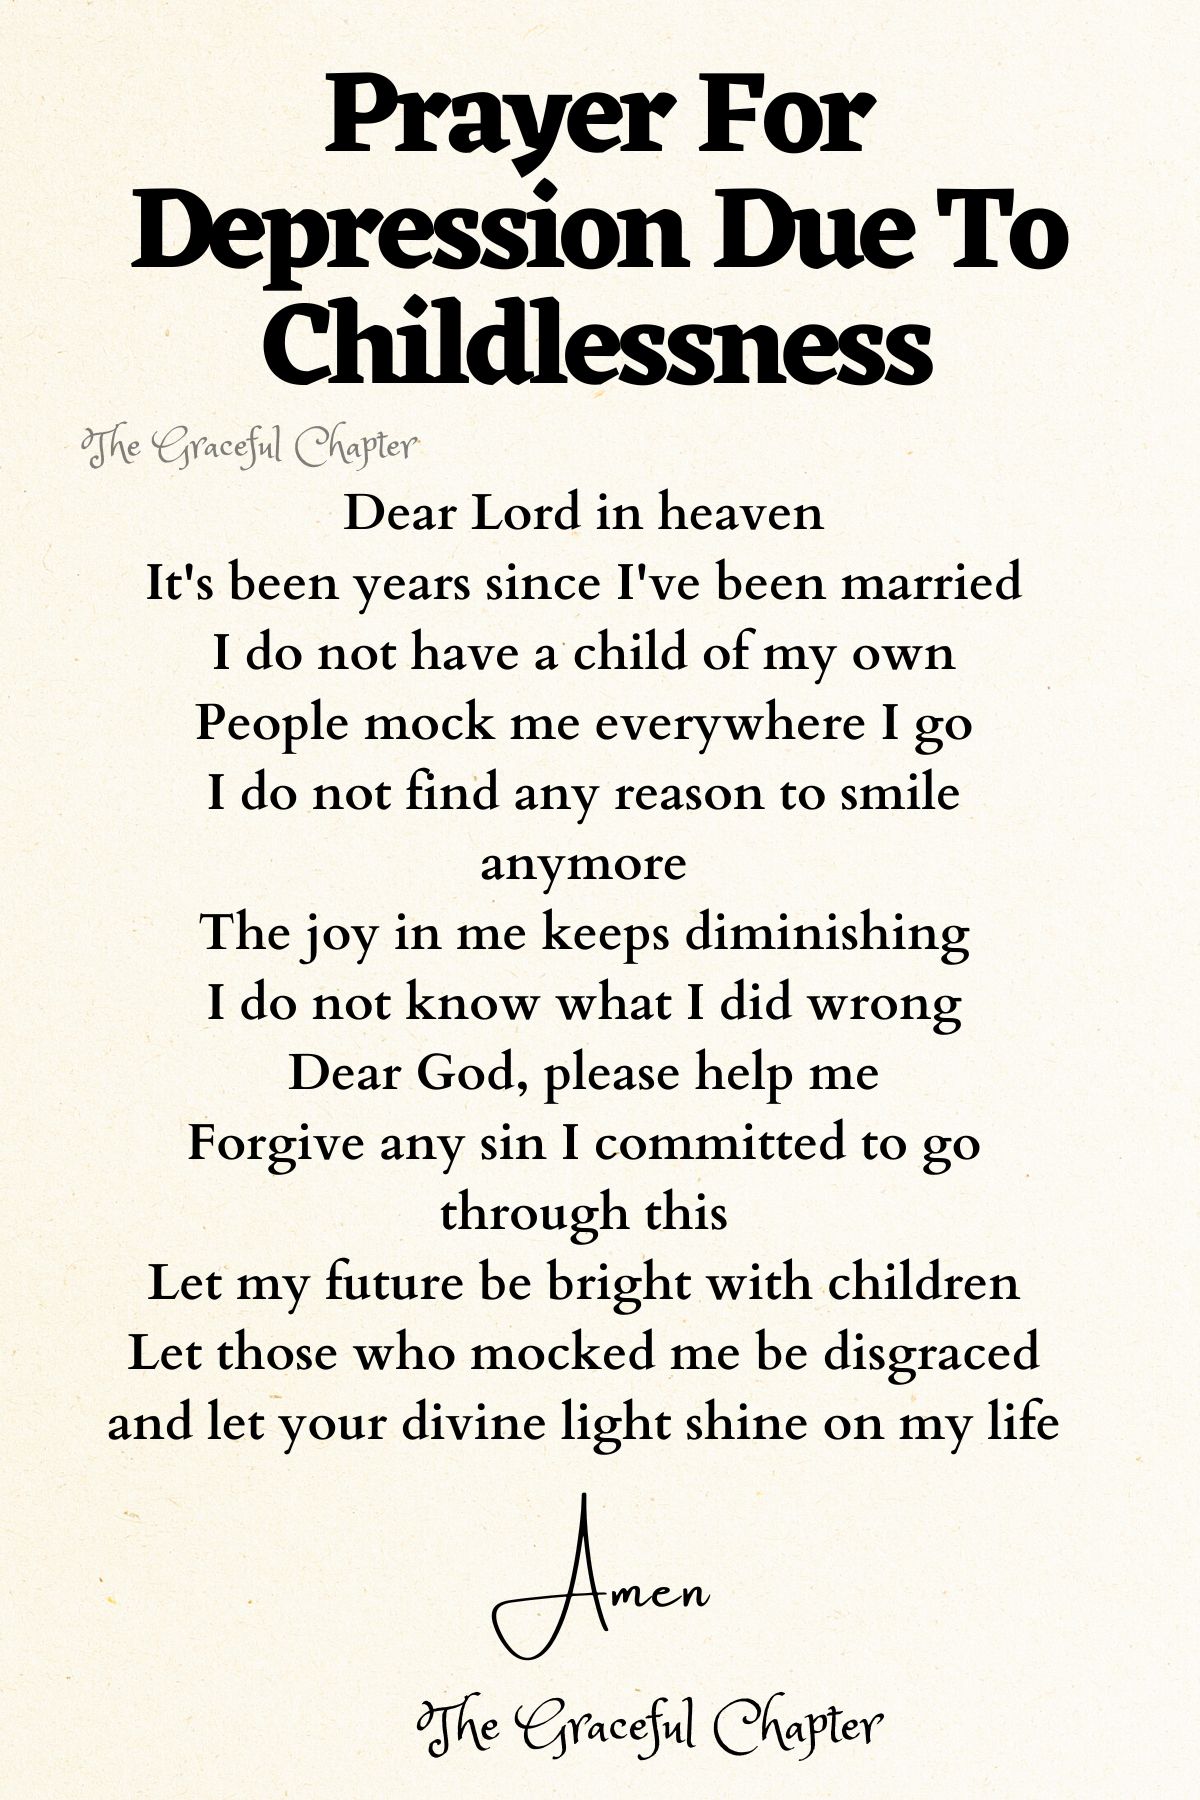 Prayer for depression due to childlessness